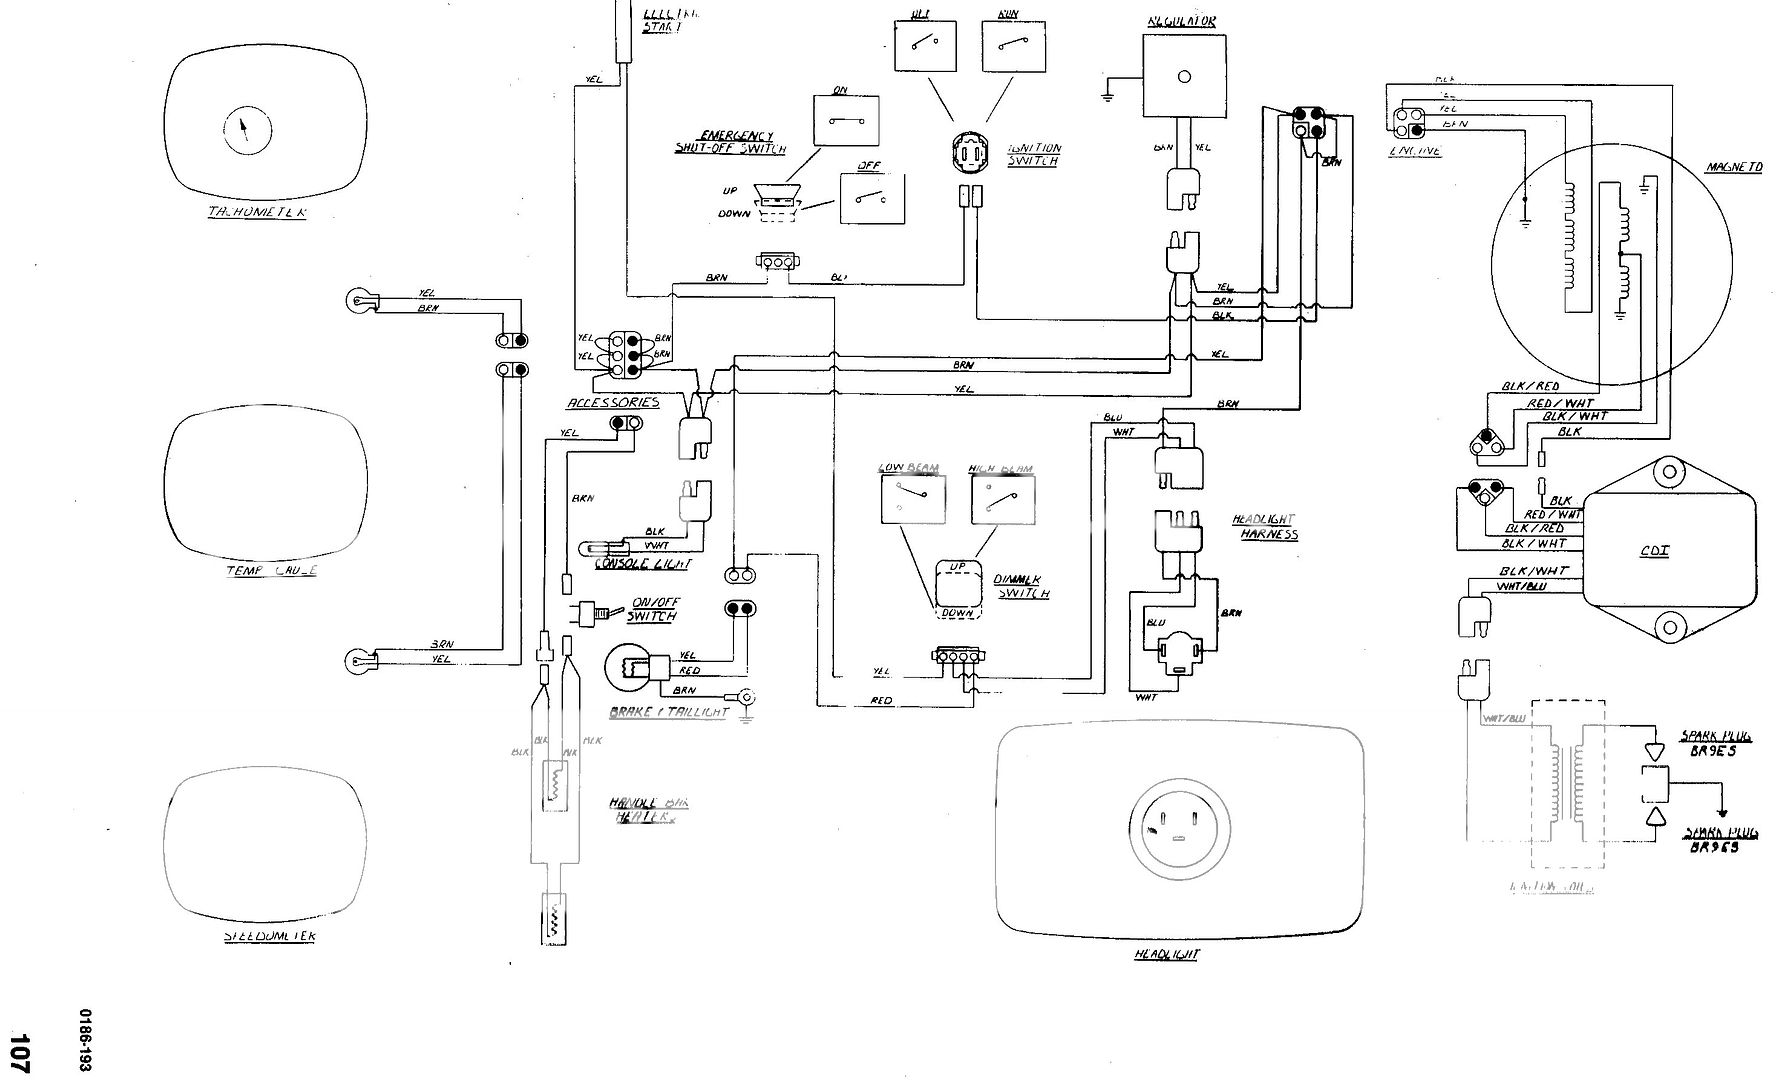 1997 Arctic Cat 580 Ext Wiring Diagram | Wiring Library